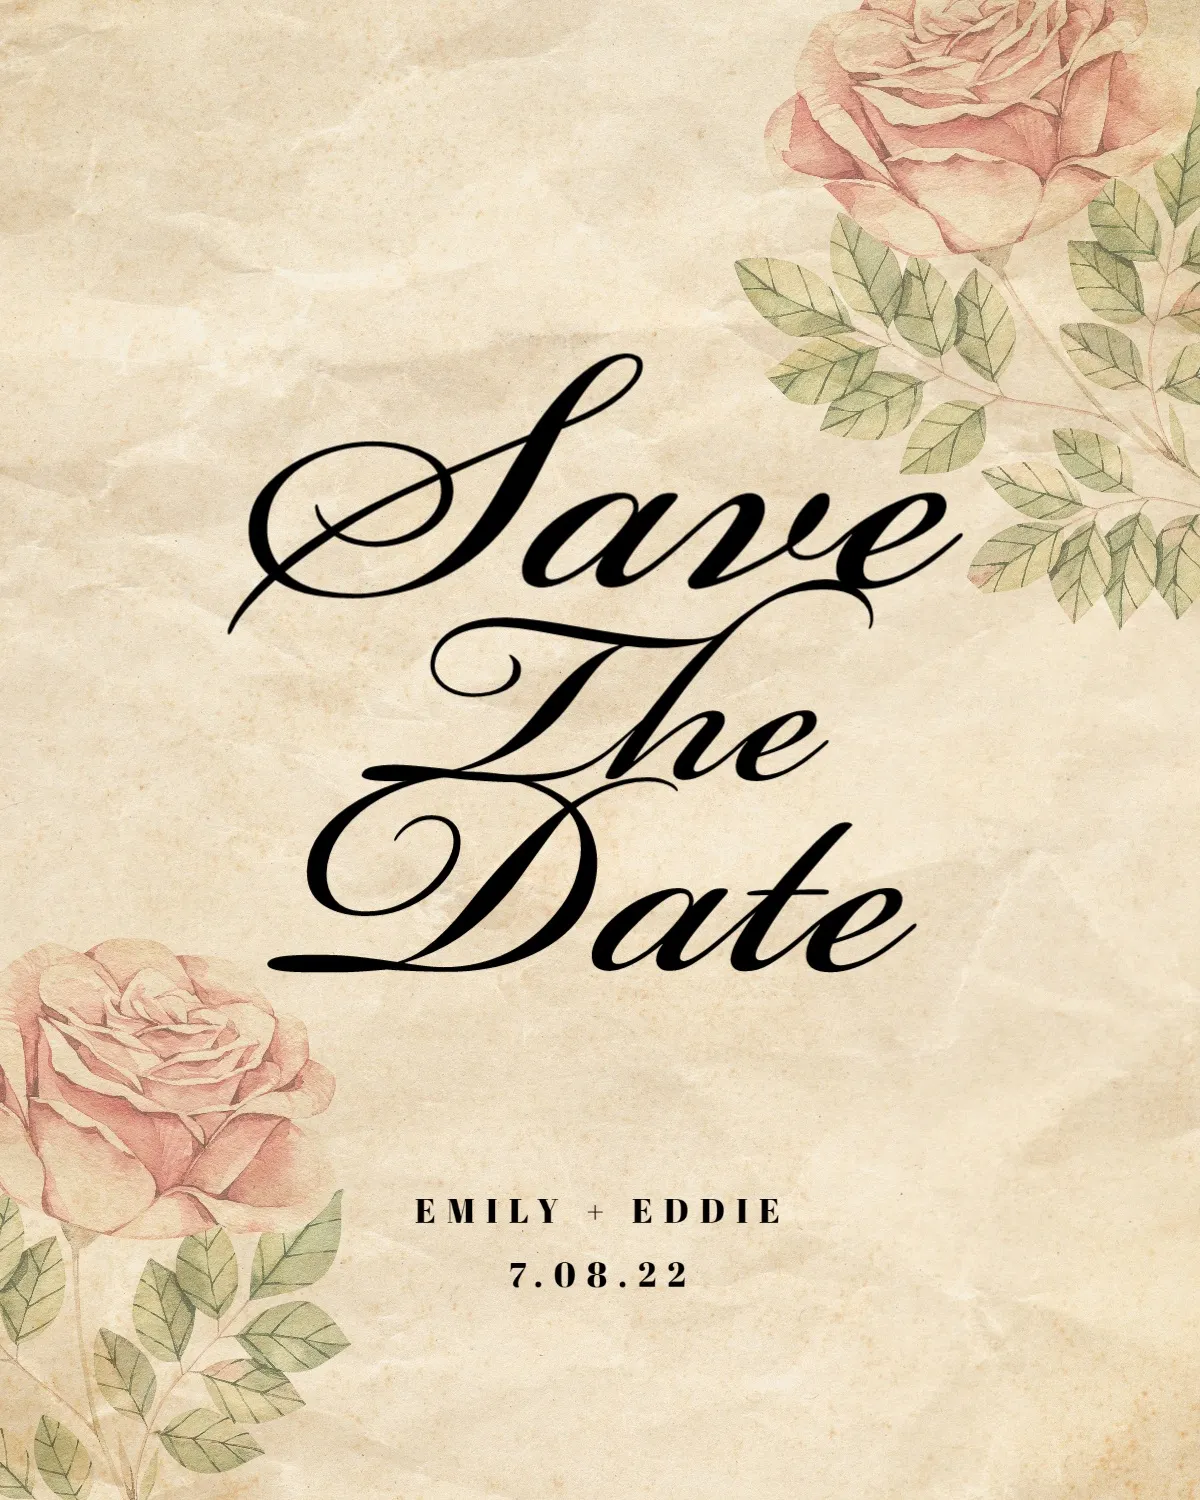 Free Save the Date Templates: Make Your Own Save the Date Cards